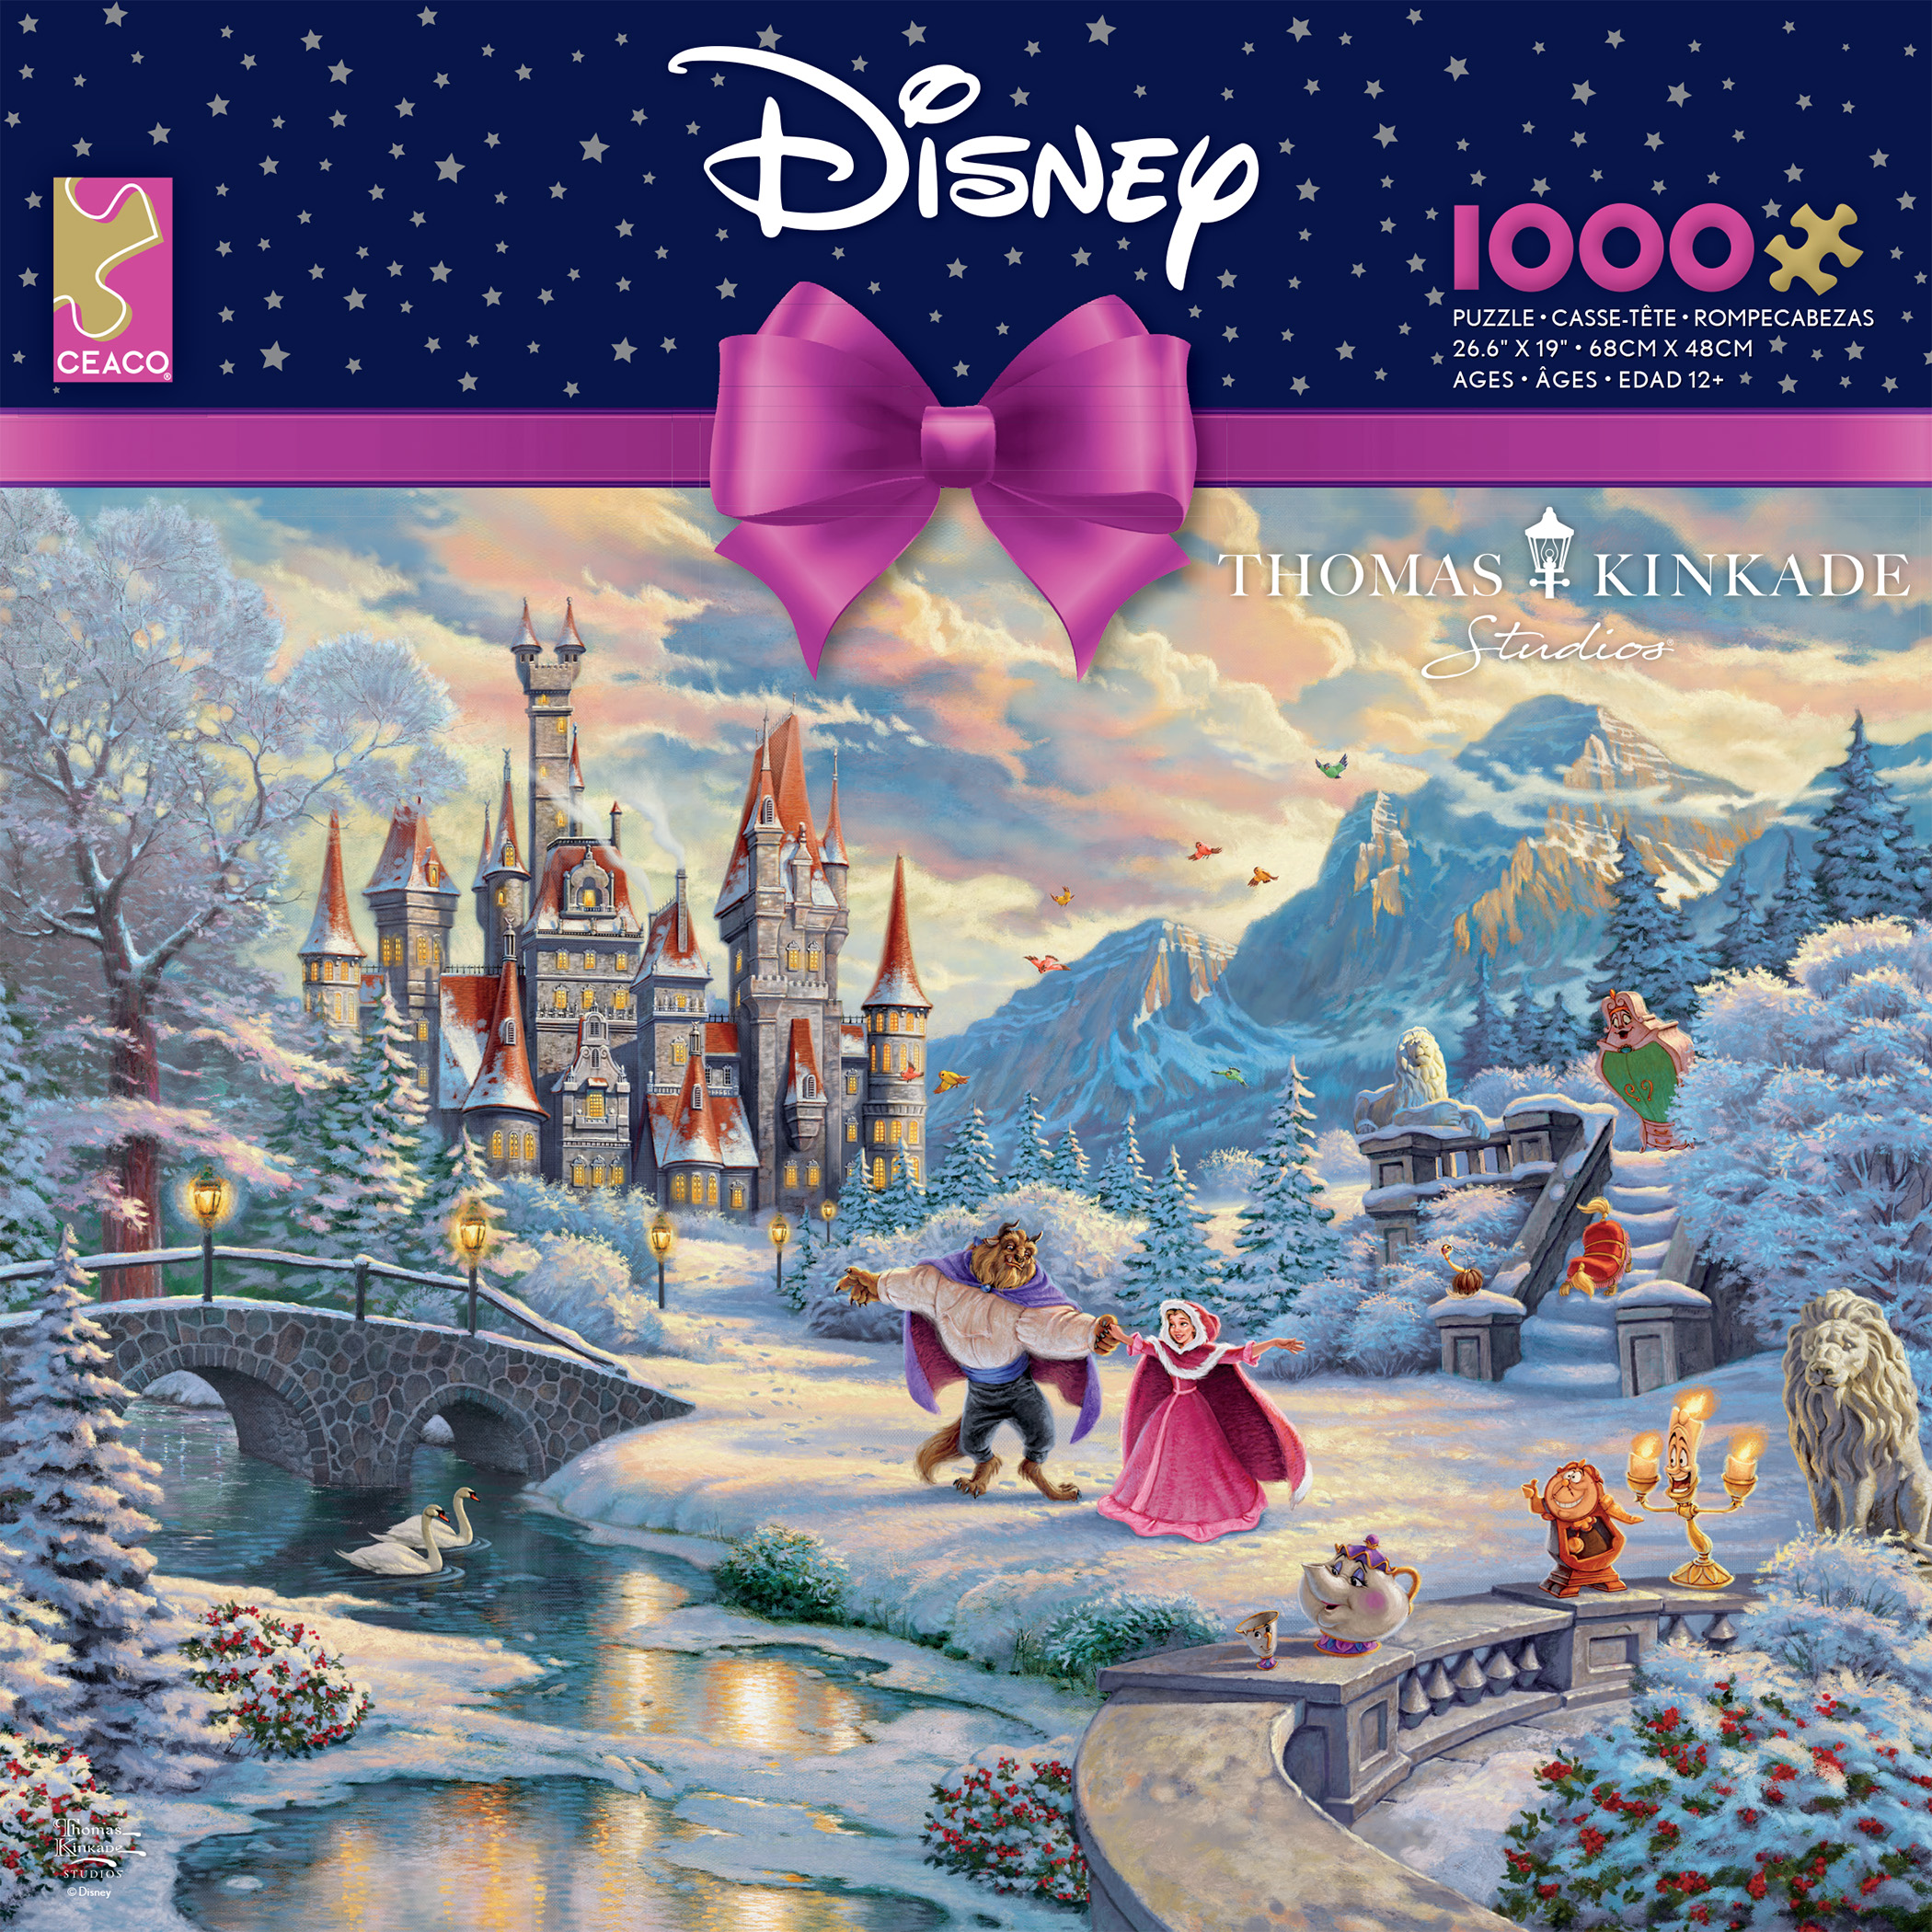 Beauty and the Beast Enchantment - Scratch and Dent Disney Jigsaw Puzzle